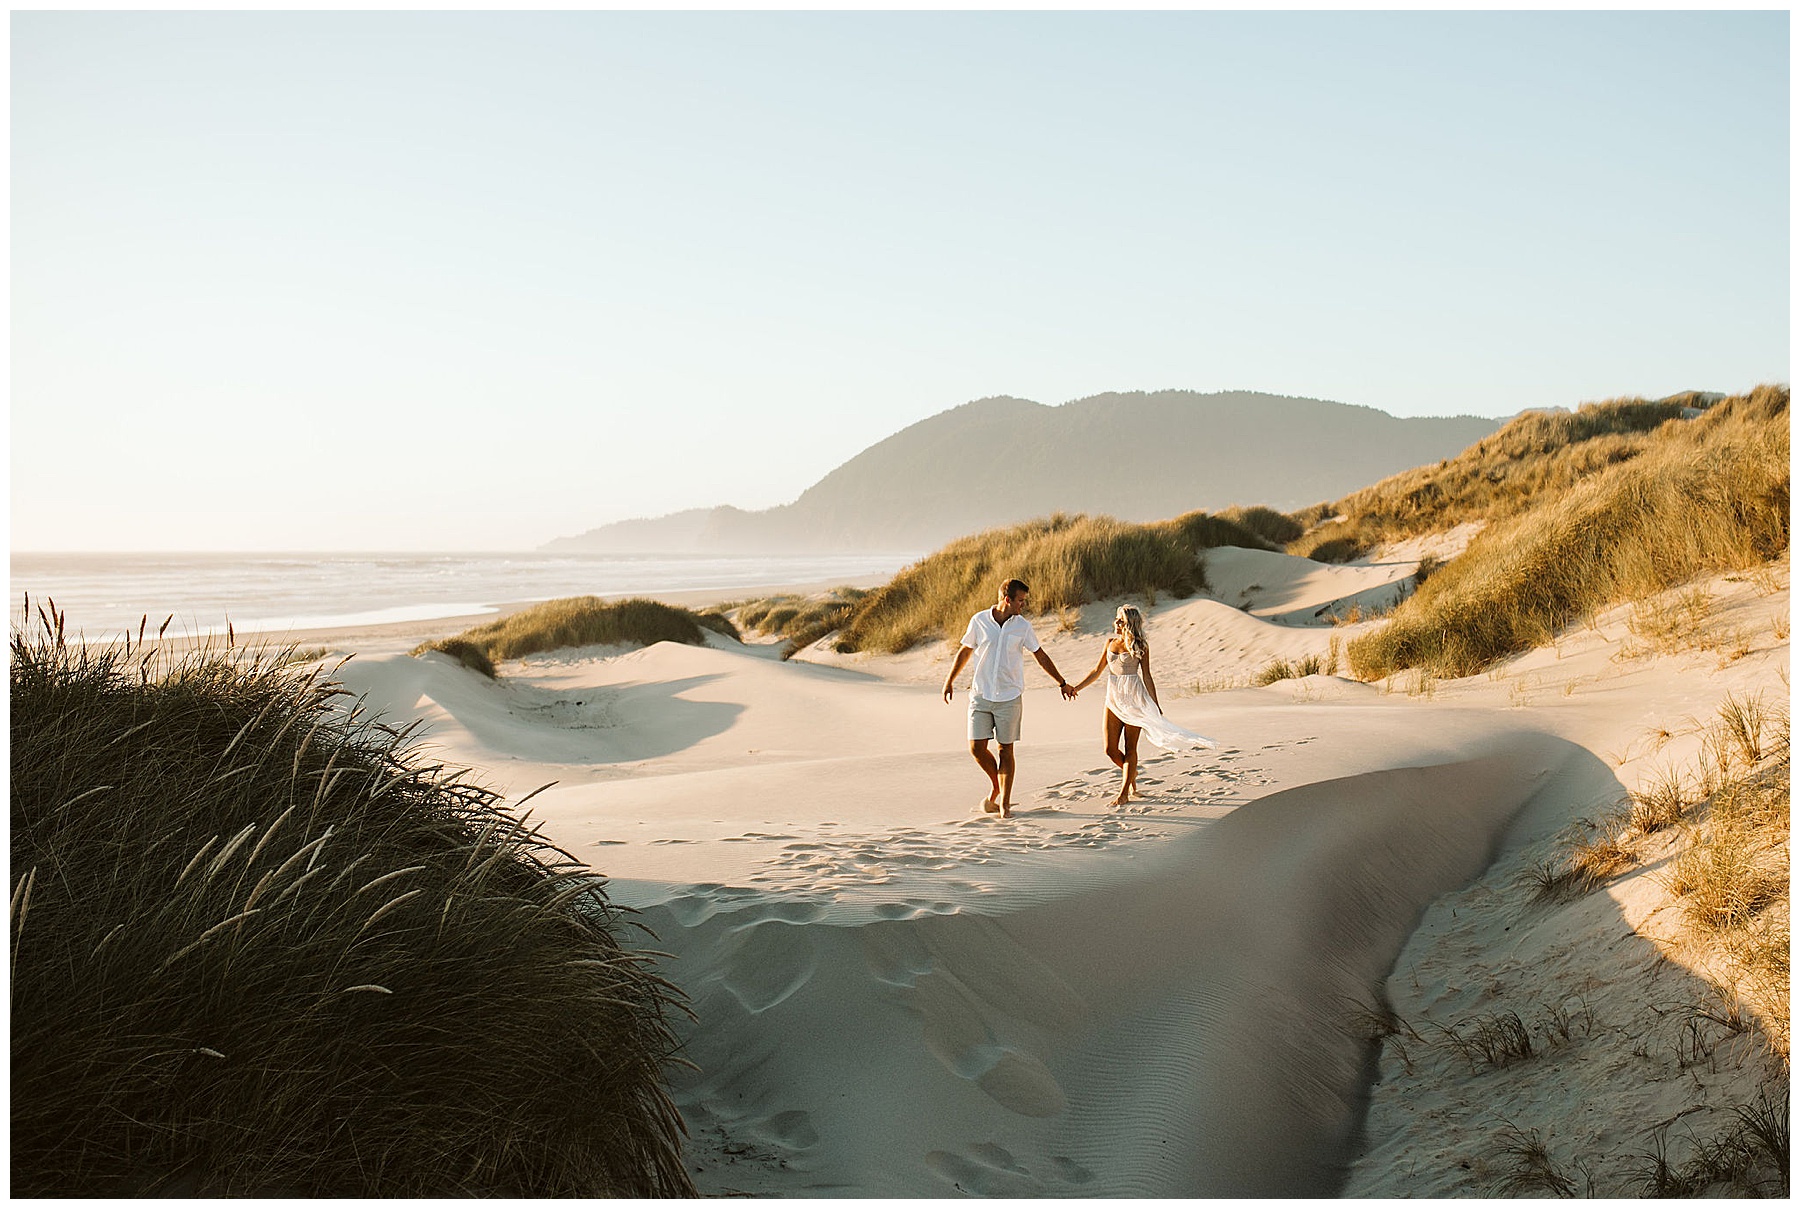 white male and white female holding hands on a beach with grassy hills in the background